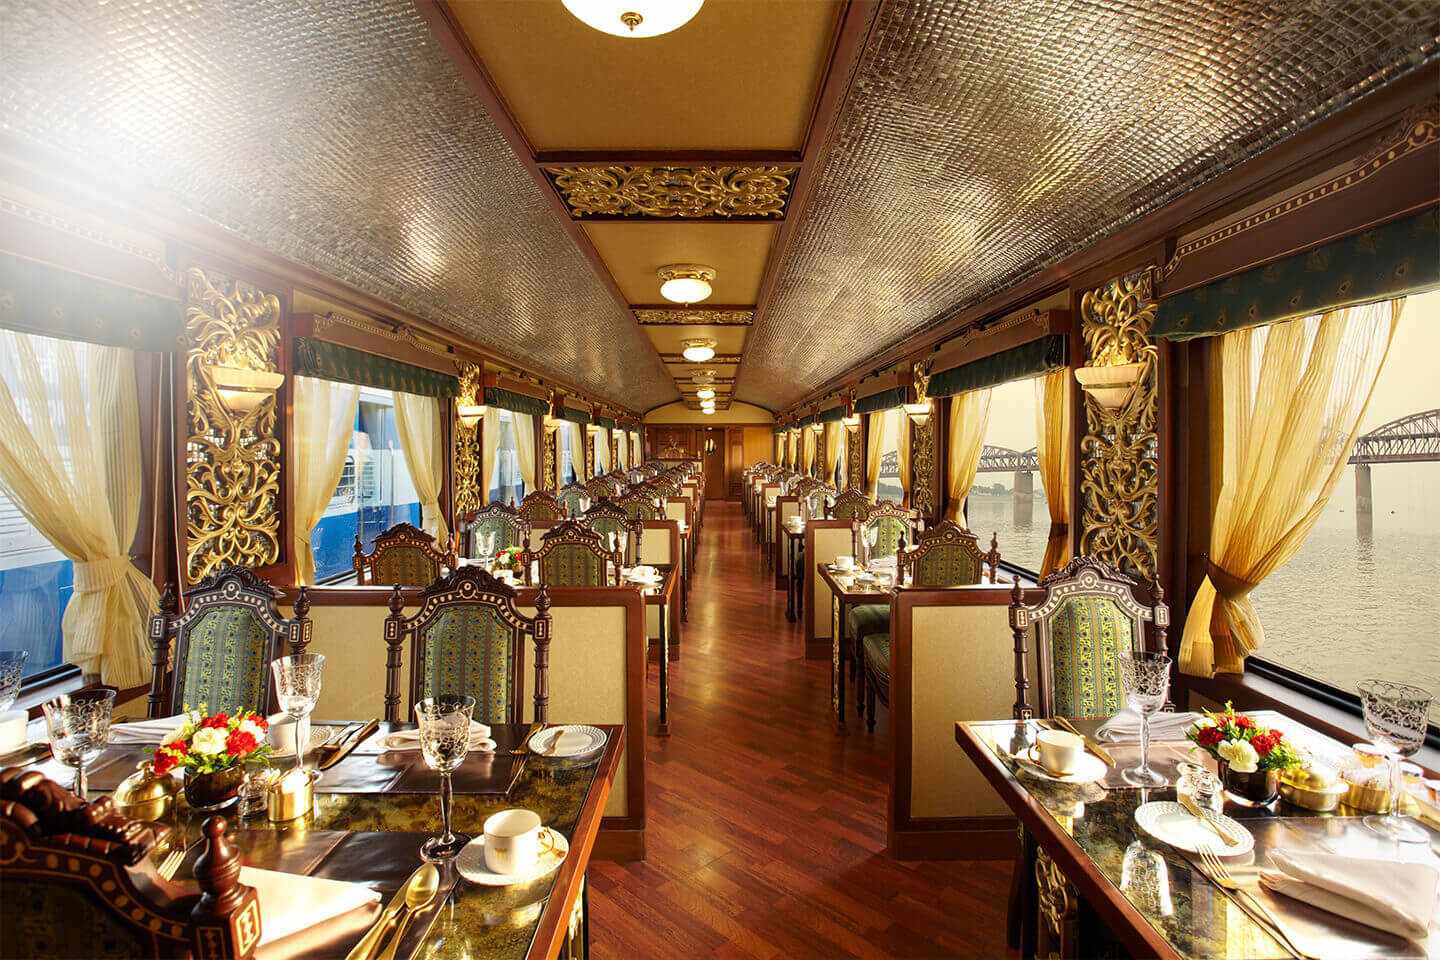 Top Luxury Trains Of India